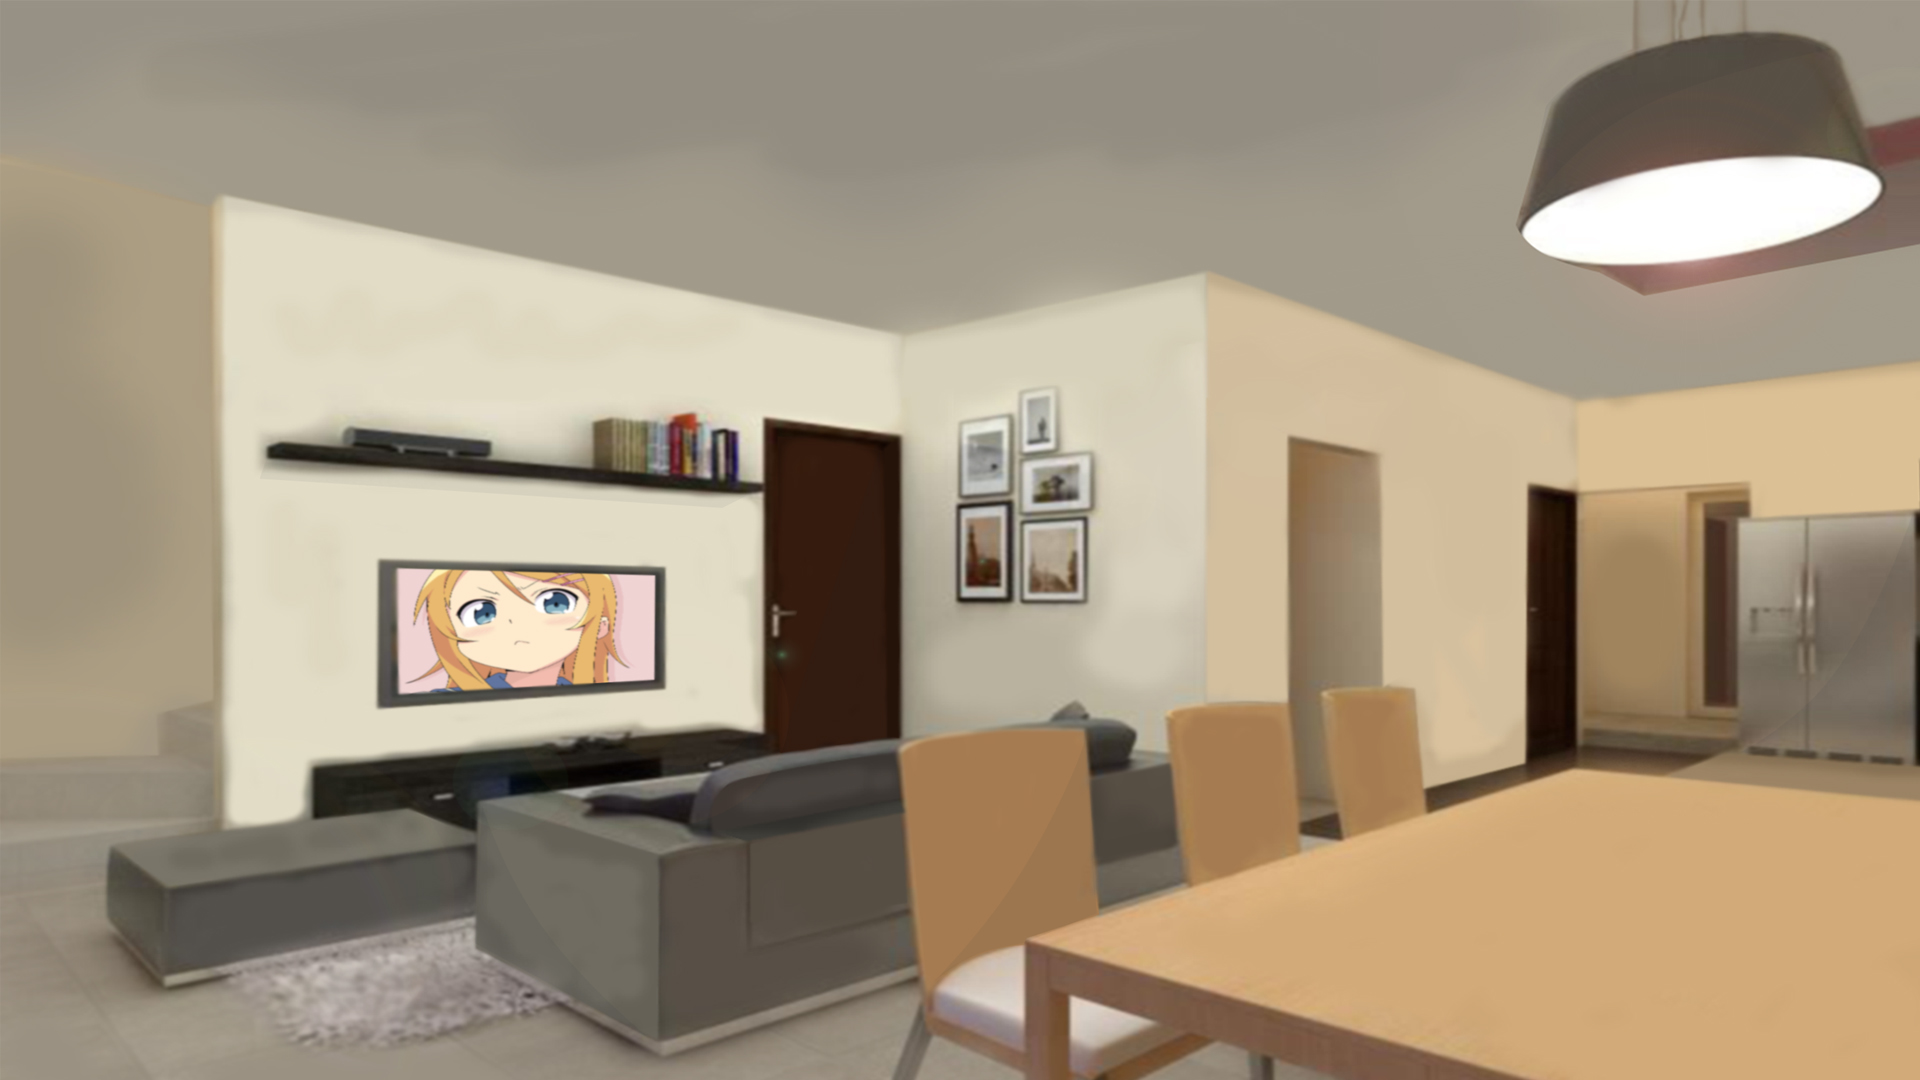 Image - Anime living room background by rhiezkyrach-d7ds29x.jpg